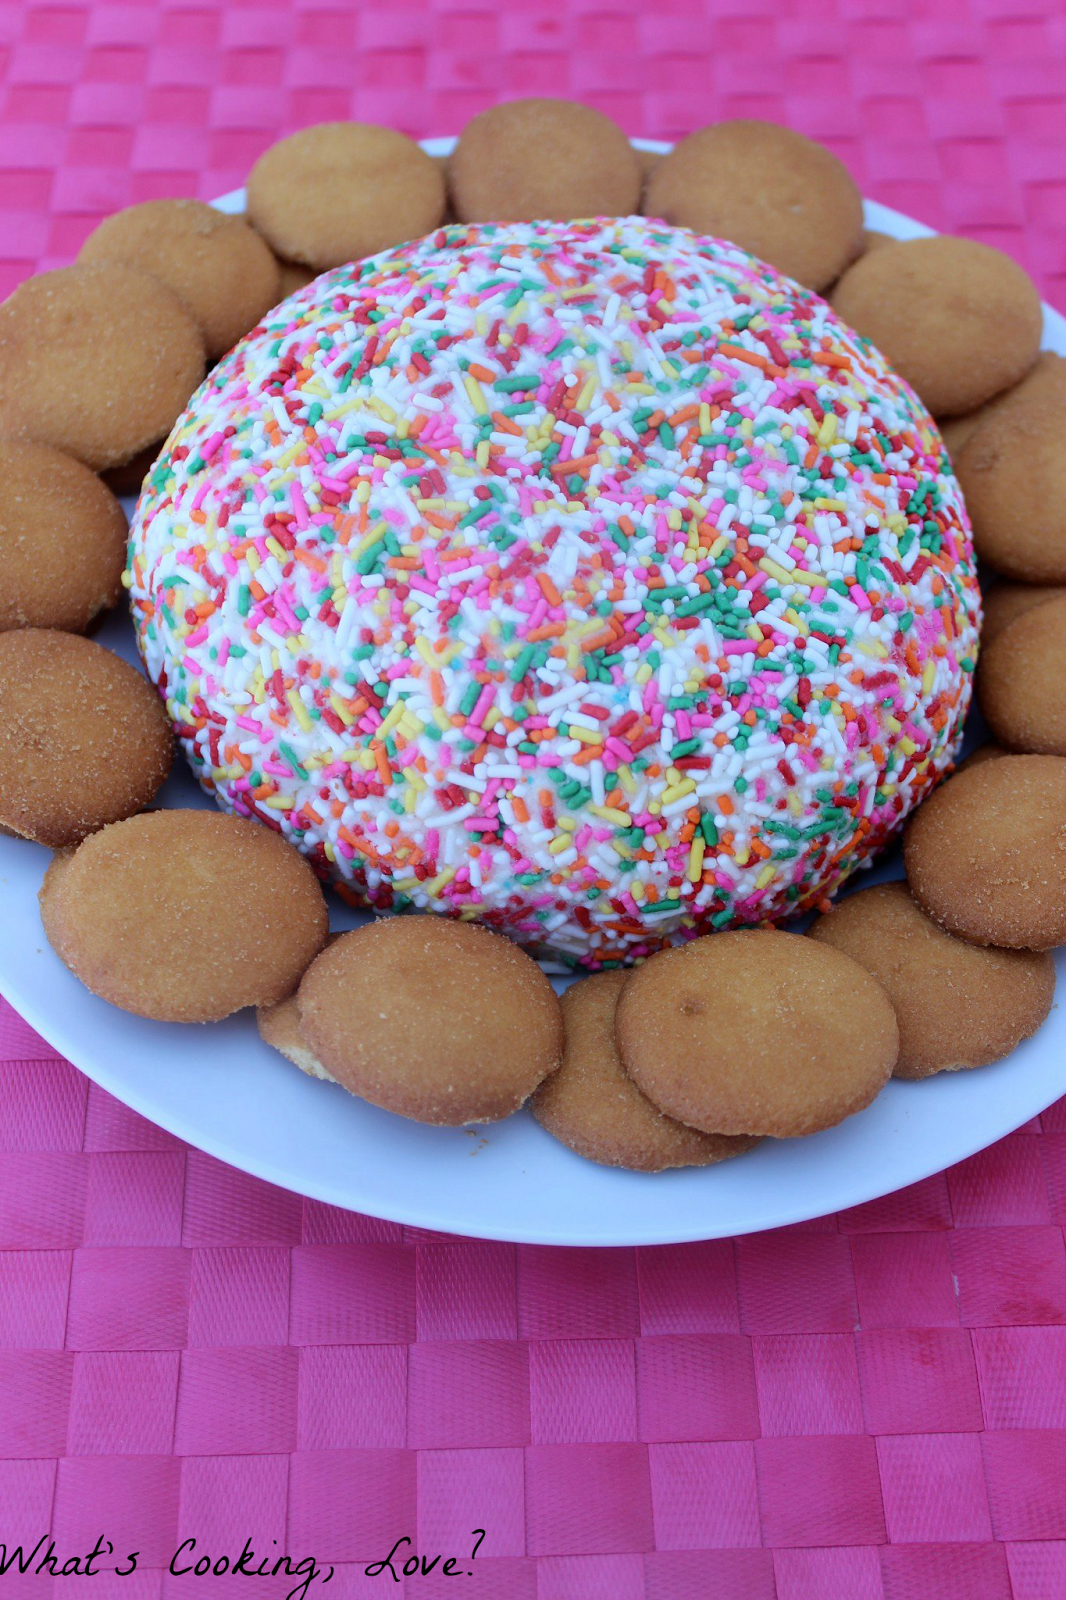 Funfetti Cake Cheese Ball - Whats Cooking Love?1066 x 1600